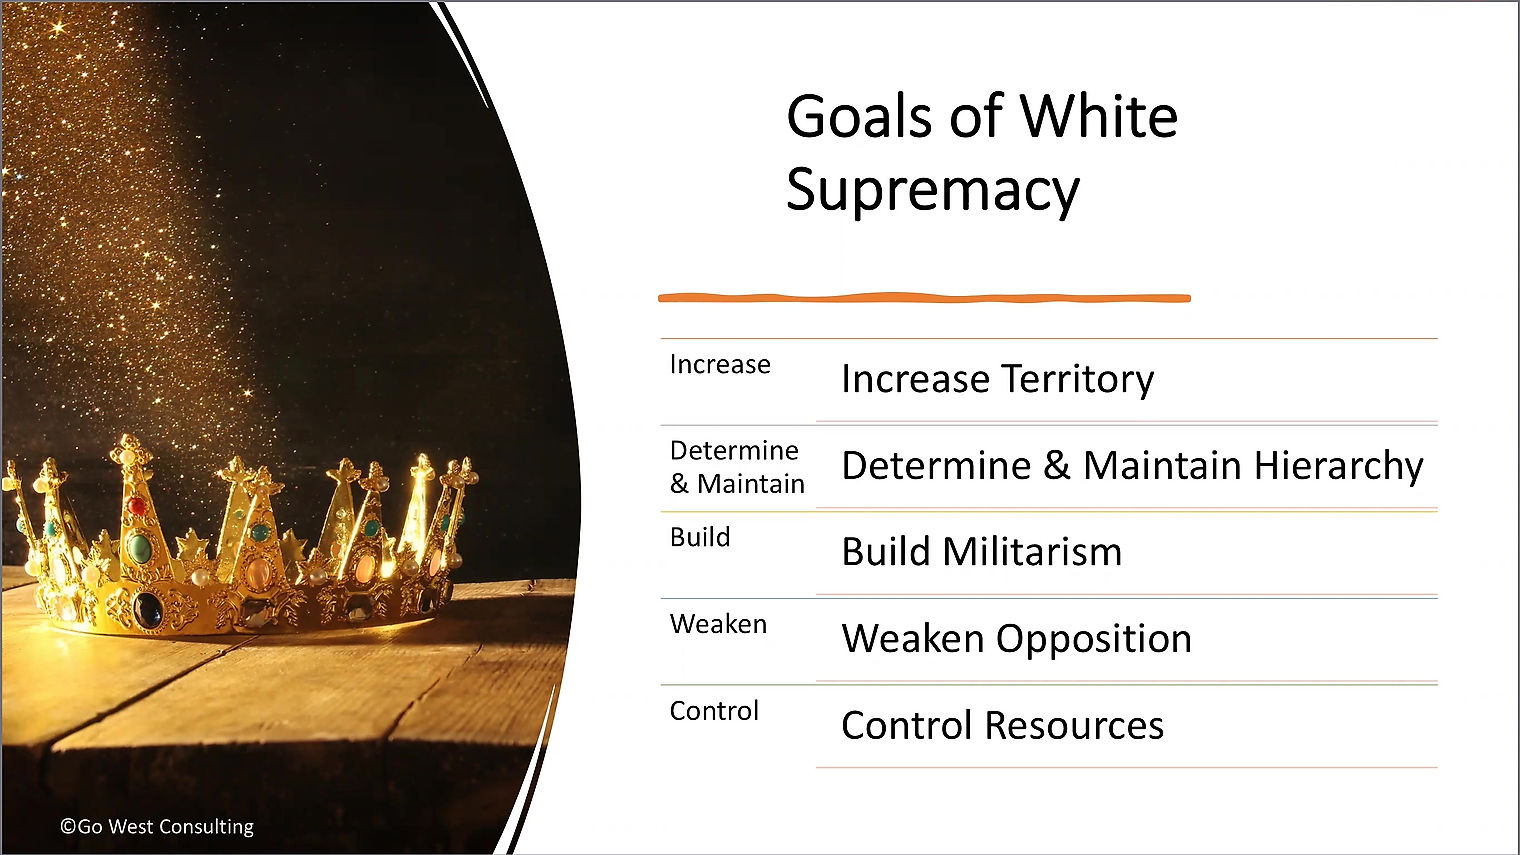 A Preview of Dismantling White Supremacy